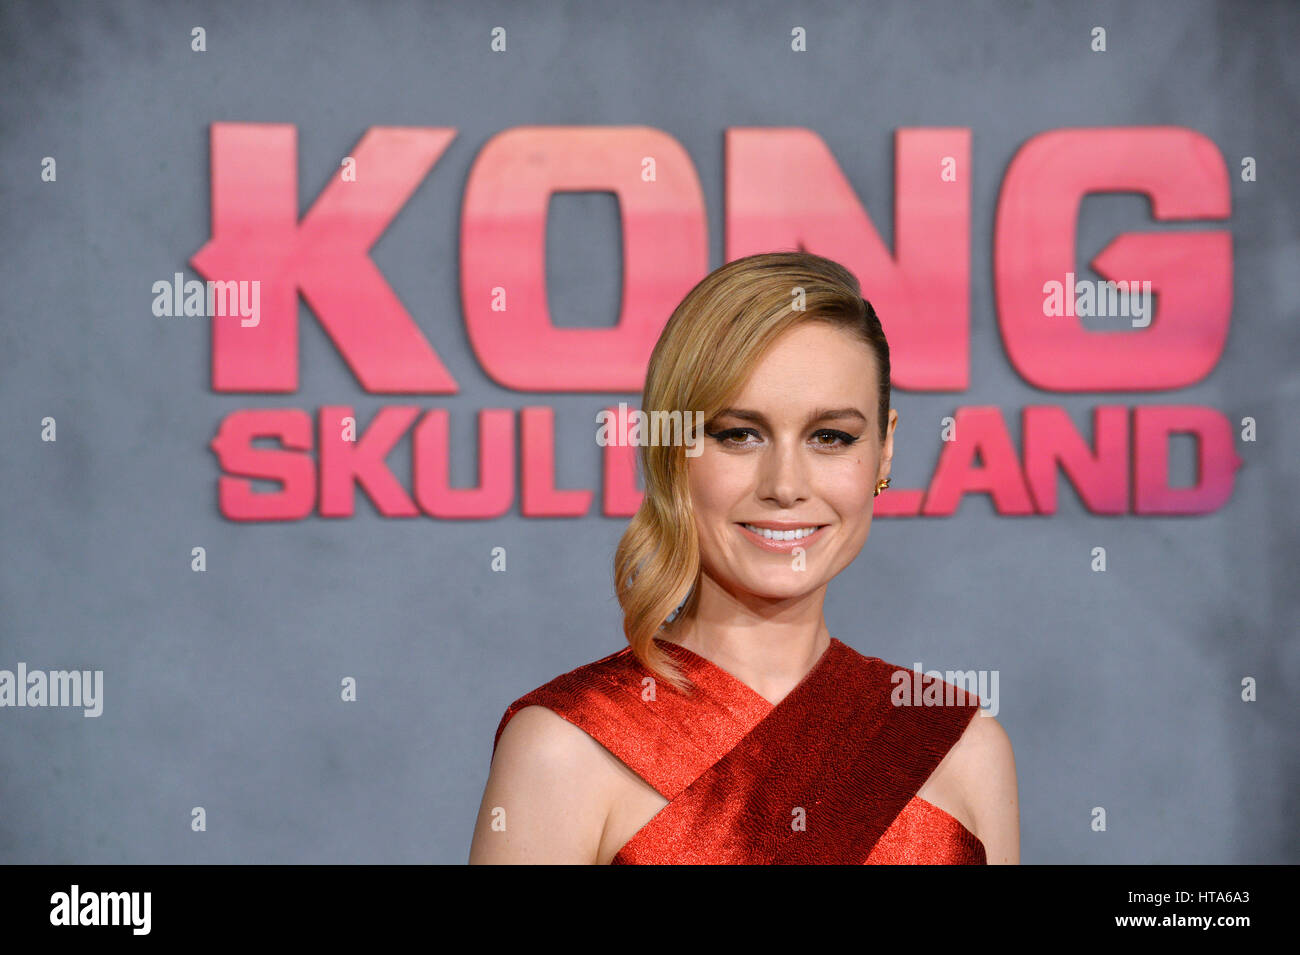 Los Angeles, USA. 08th Mar, 2017. LOS ANGELES, CA. March 8, 2017: Actress Brie Larson at the premiere for "Kong: Skull Island" at Dolby Theatre, Hollywood. Picture Credit: Sarah Stewart/Alamy Live News Stock Photo